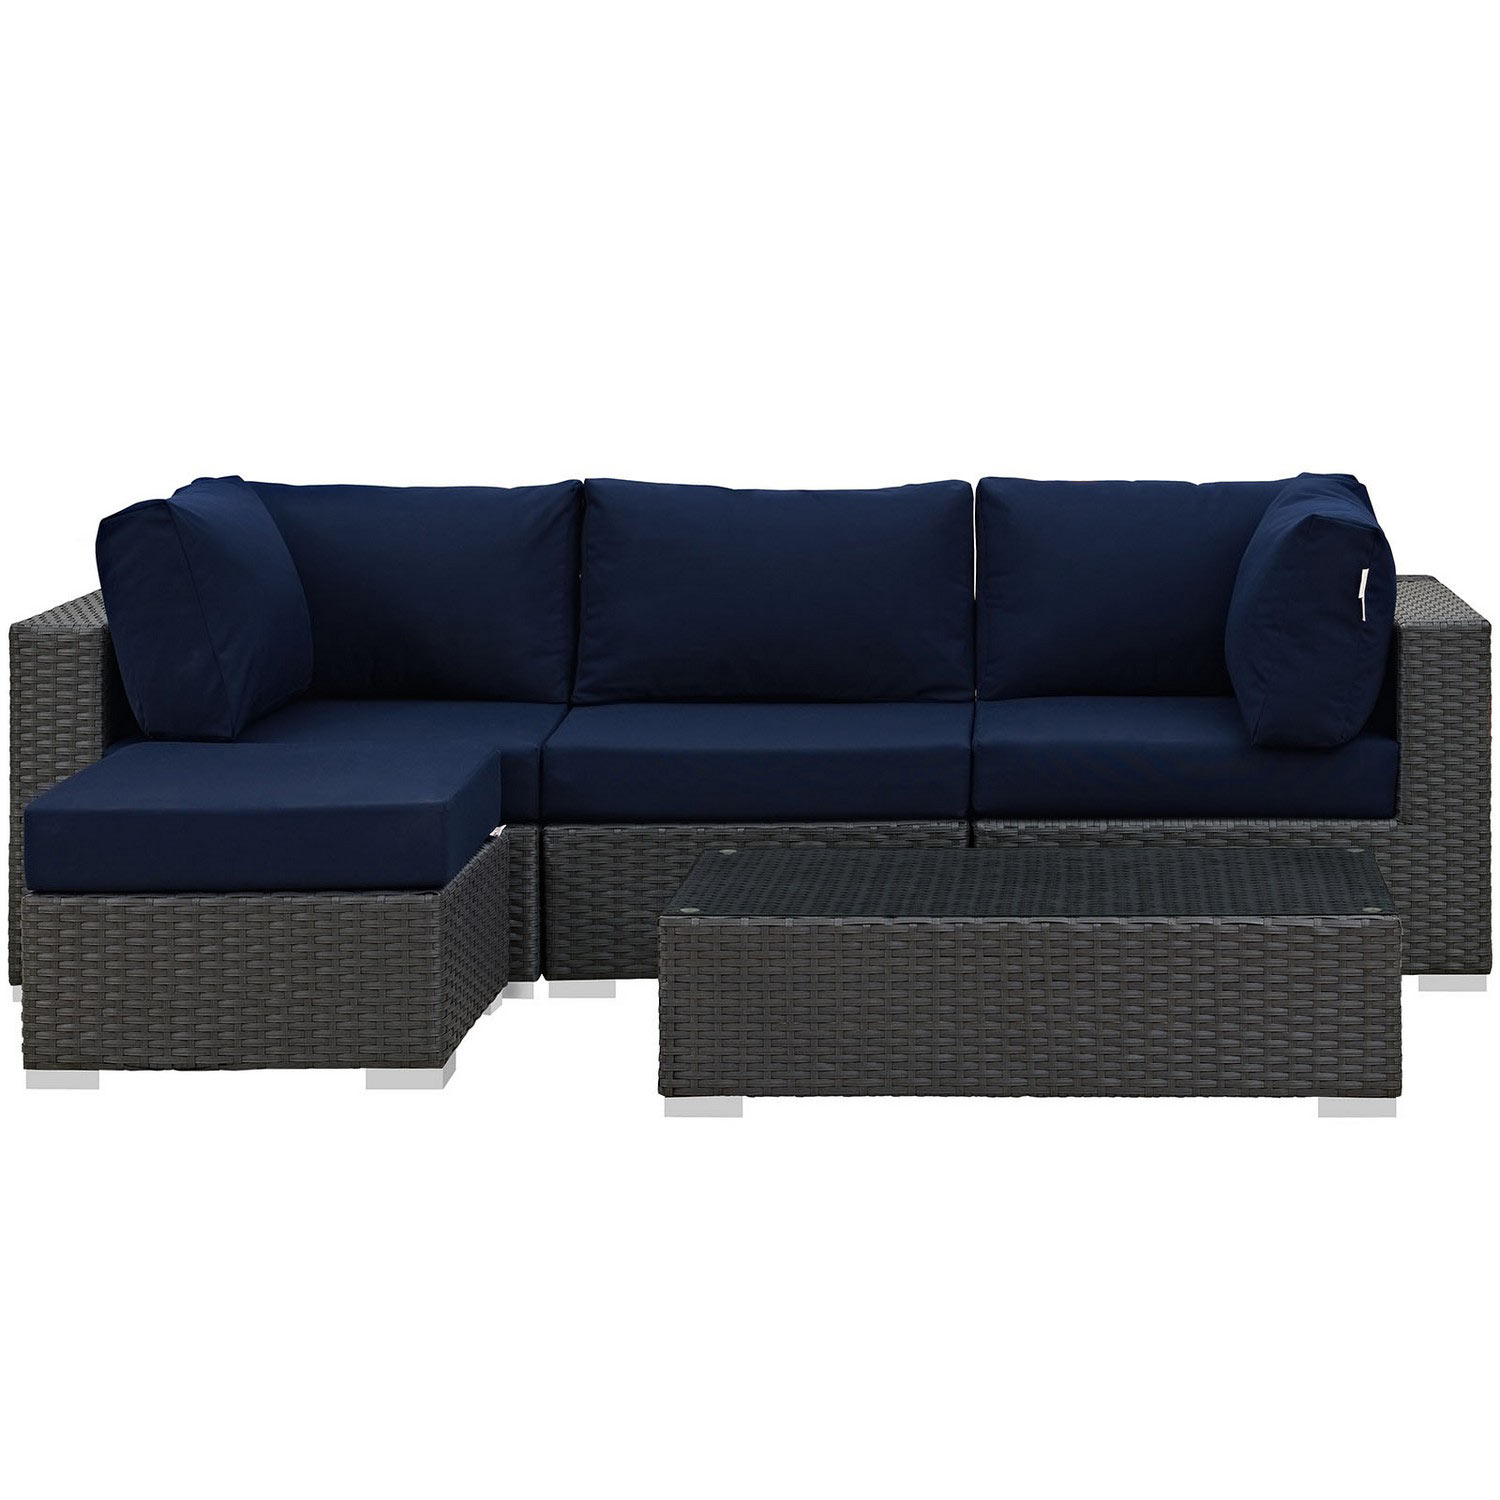 Modway Sojourn 5 Piece Outdoor Patio Sunbrella Sectional Set - Canvas Navy